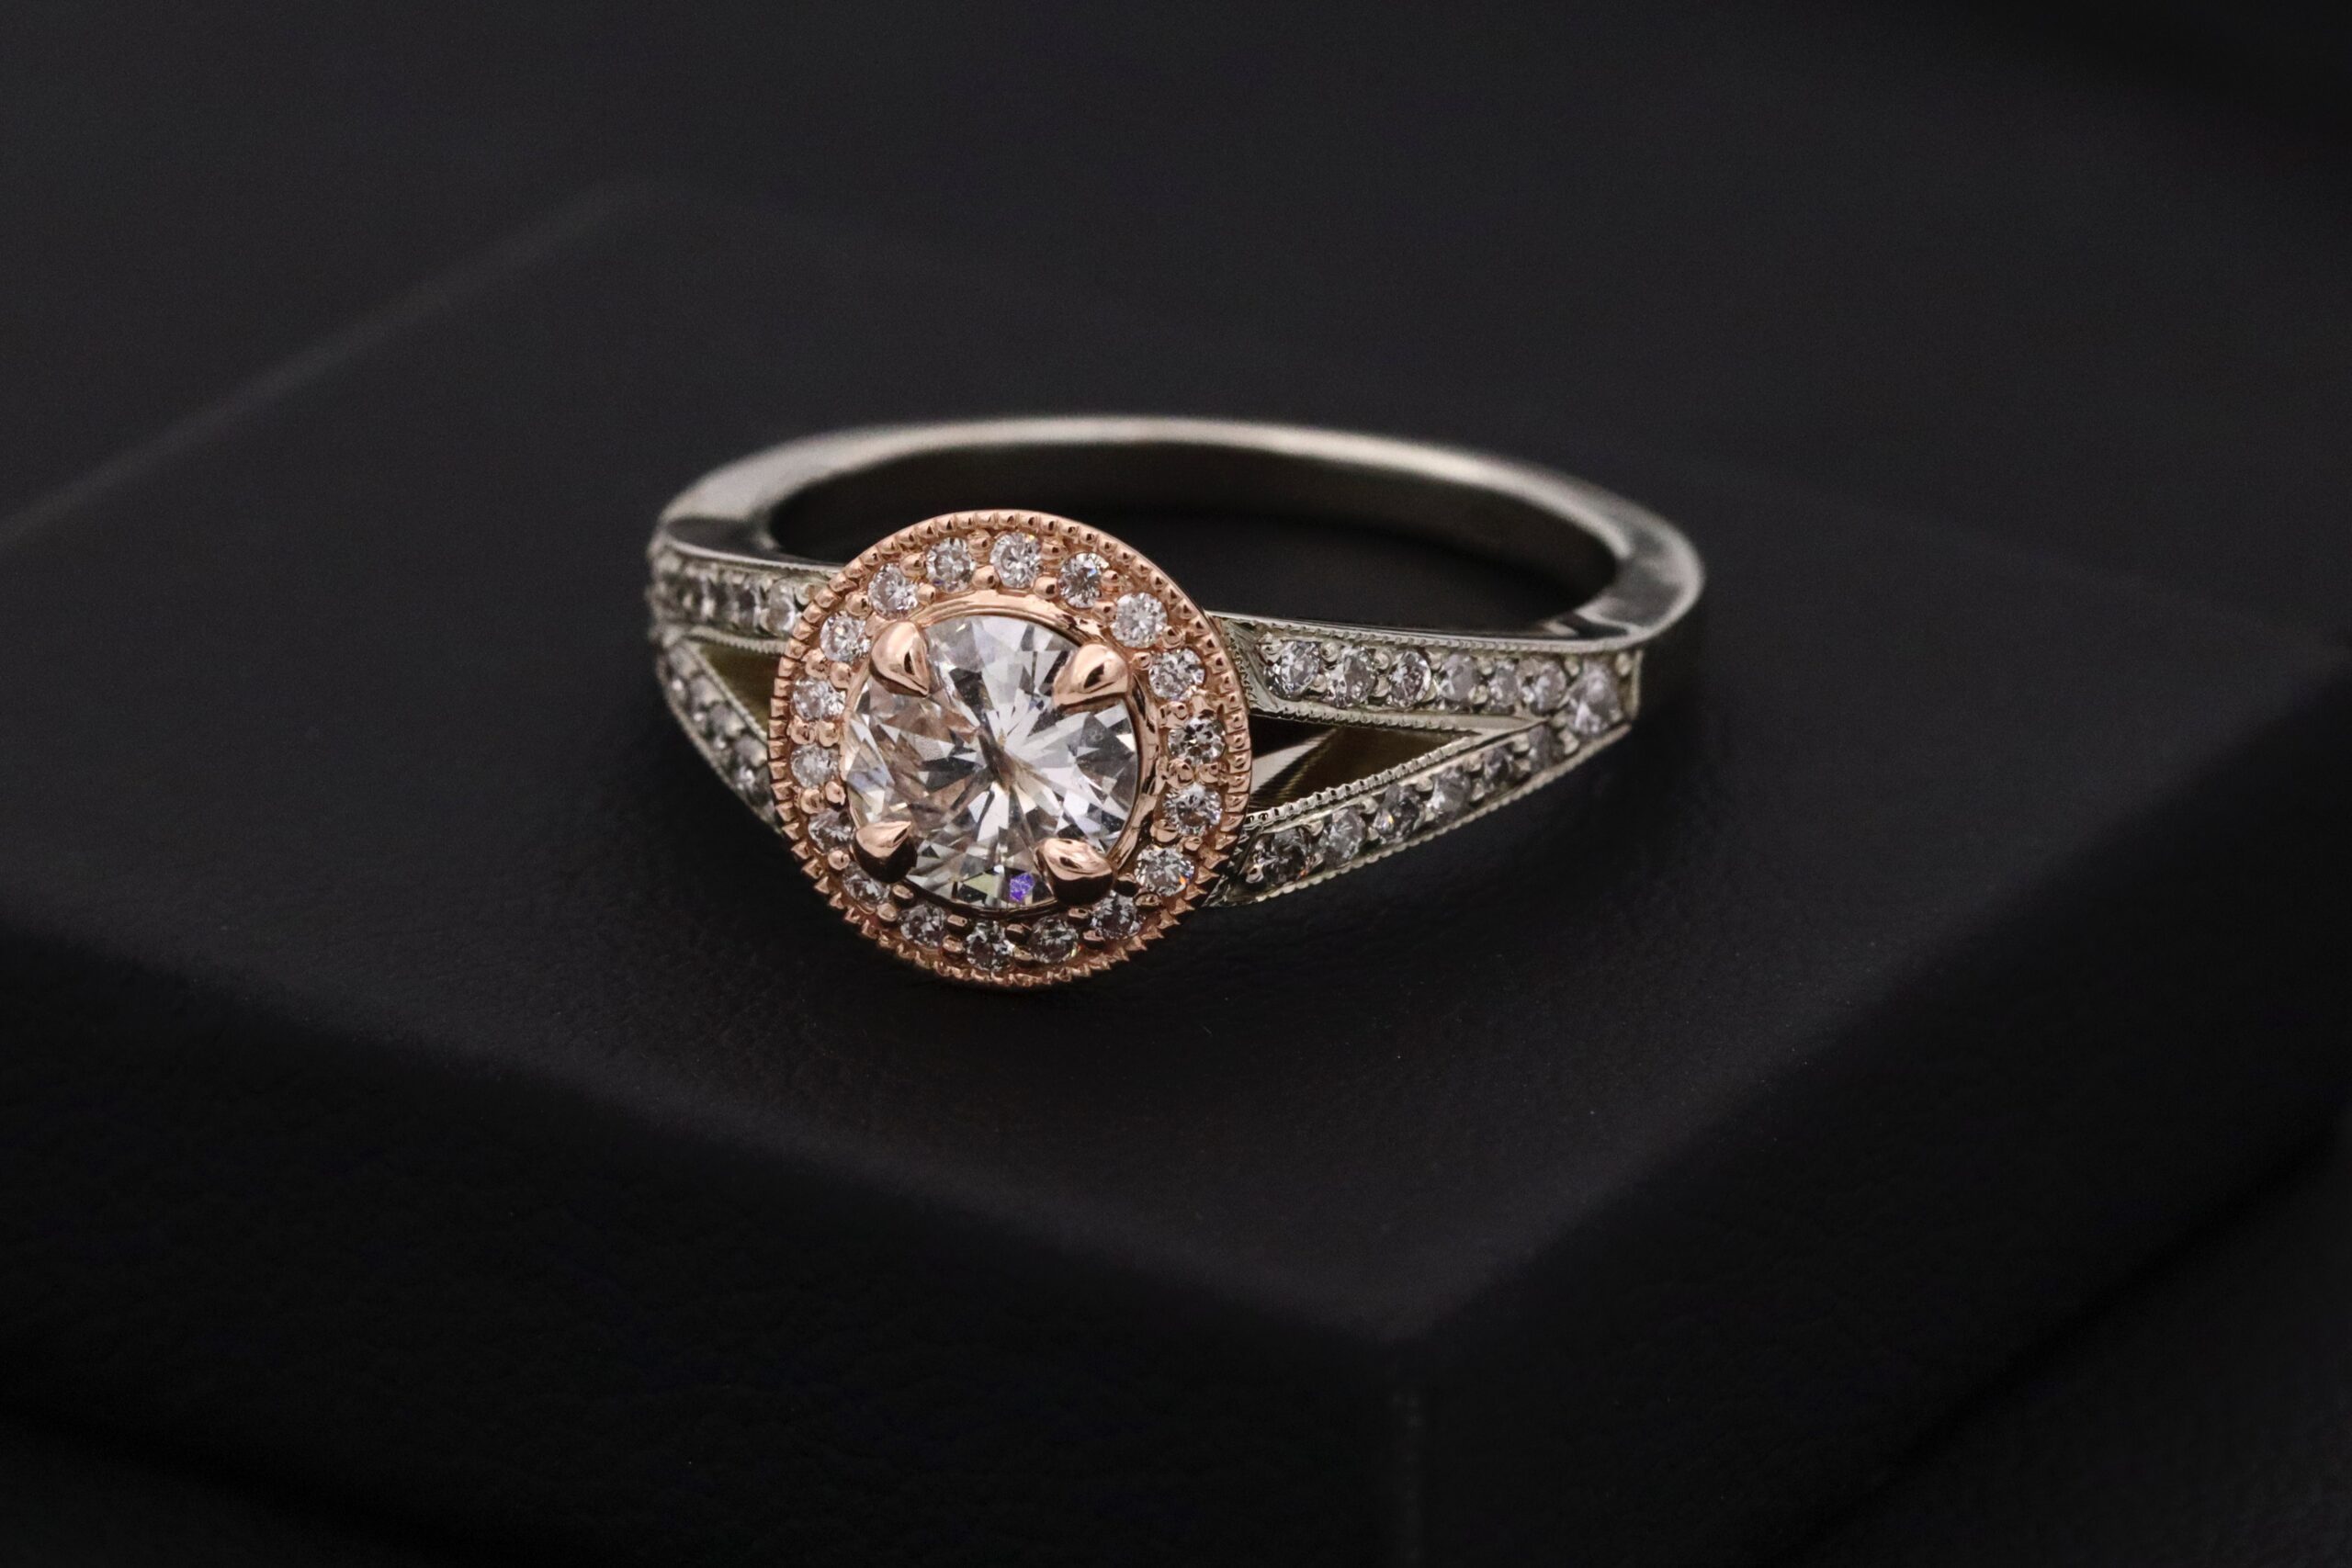 Diamond Engagement Rings for Sale